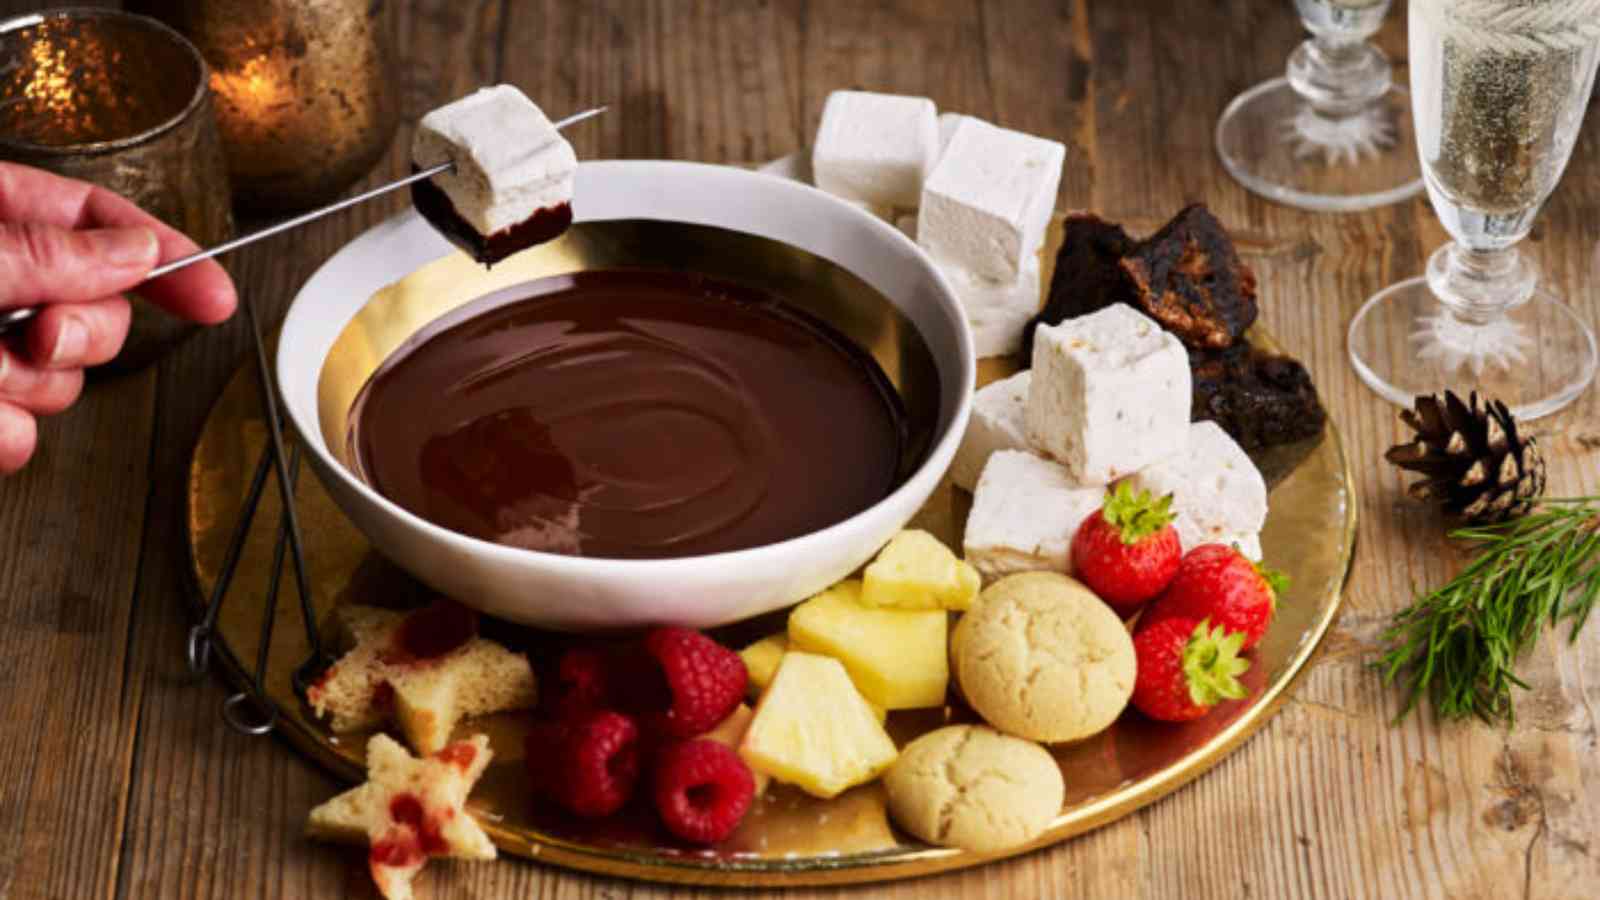 National Chocolate Fondue Day 2023: Date, History, Types and Recipes